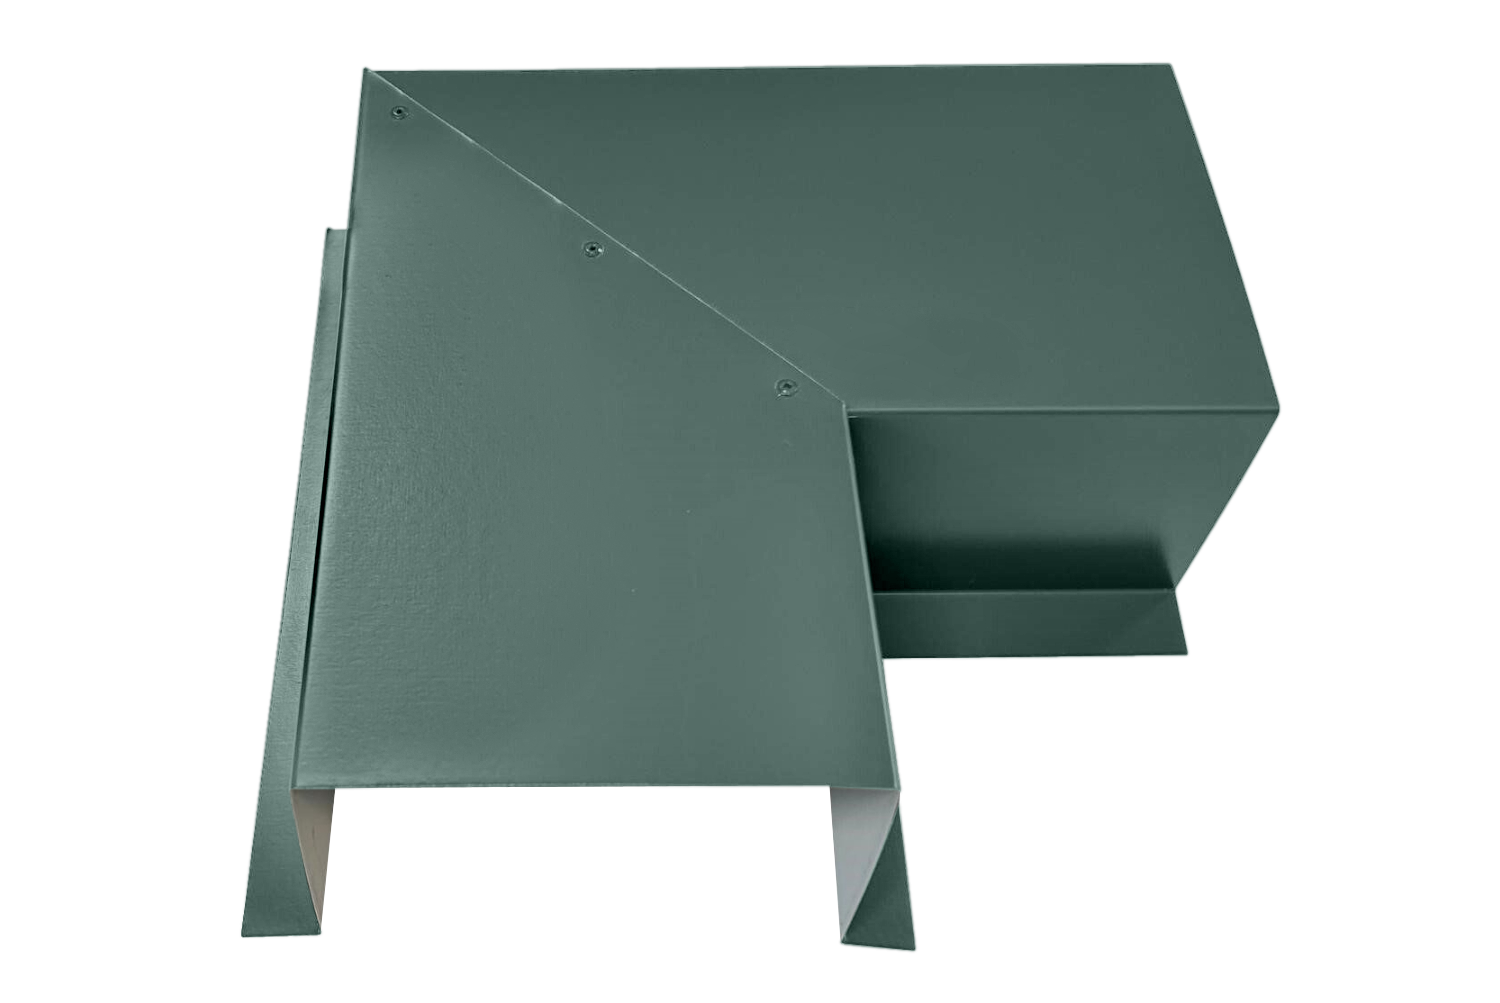 A green, geometric metal object with multiple triangular and rectangular surfaces, featuring sharp edges and small hinges or screws. Made from premium quality 24 gauge steel, the design suggests it could be a Perma Cover Commercial Series - 24 Gauge Line Set Cover Side Turning Elbows - Premium Quality. The background is plain white.